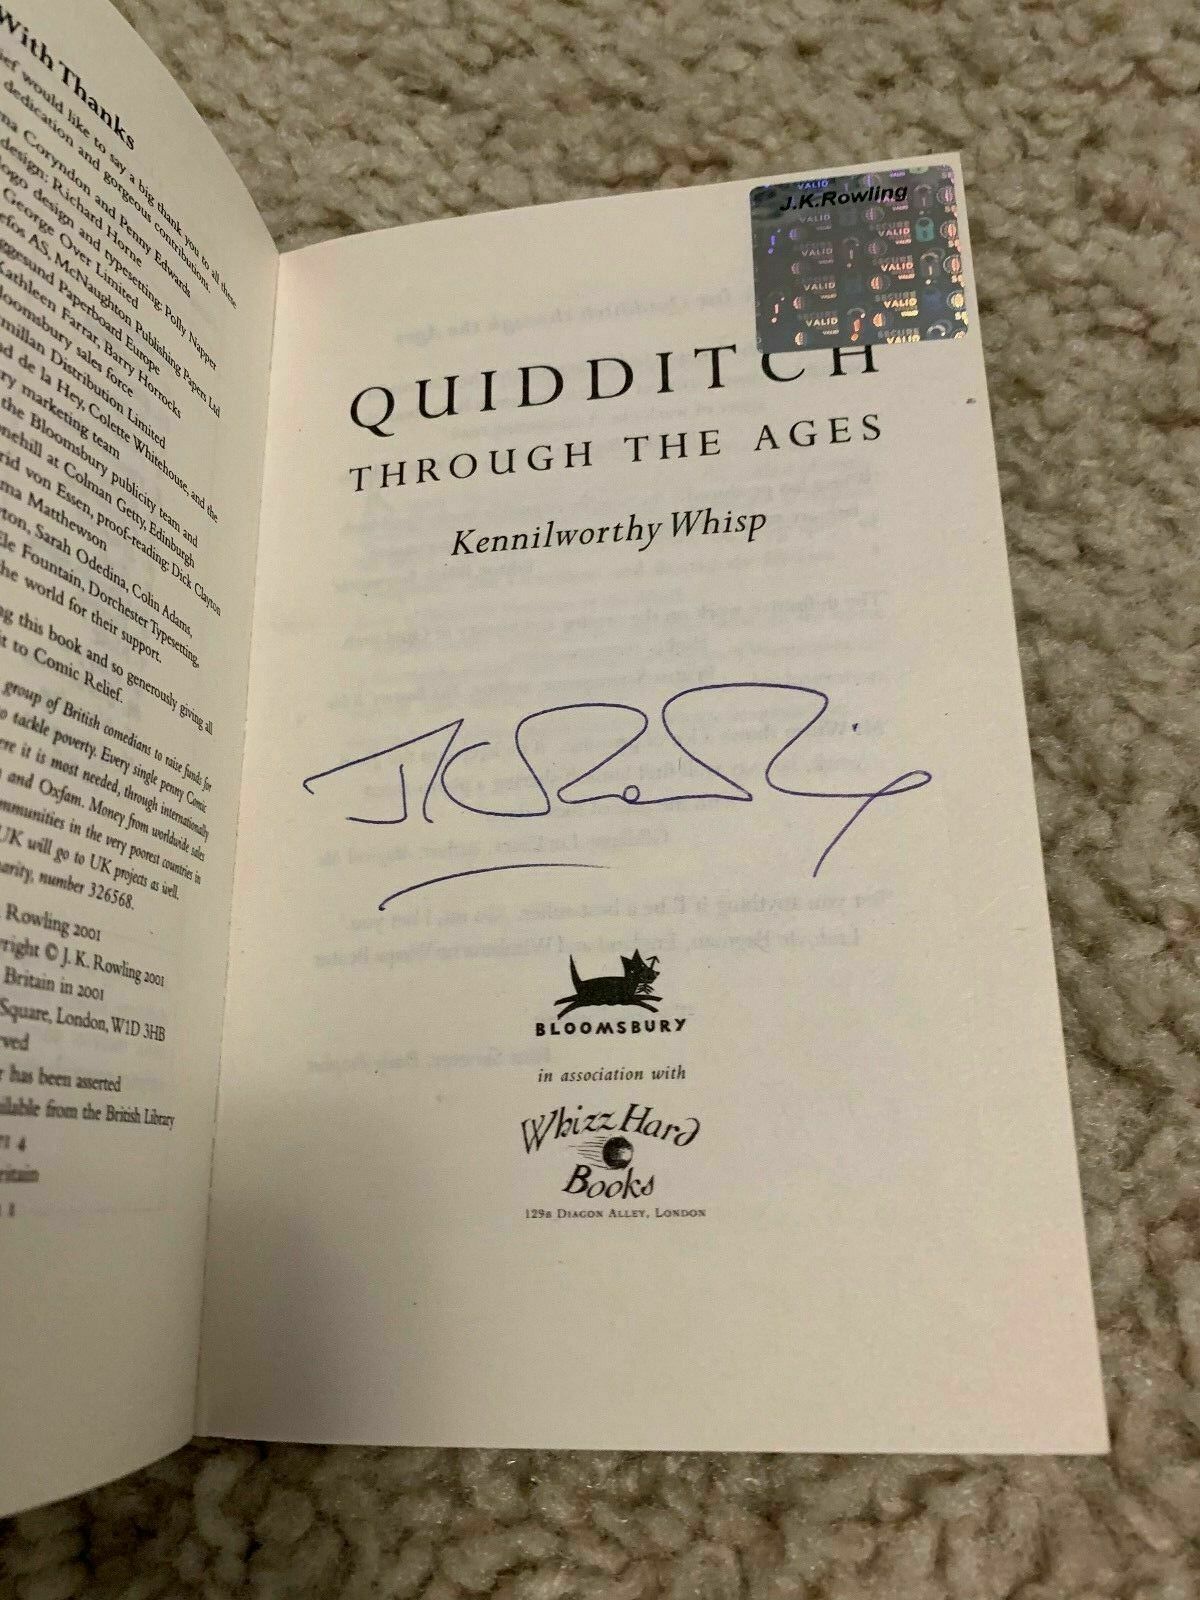 J.K. Rowling signature forgery inside a Quidditch Through the Ages with an authentic Rowling hologram, which was pulled from an authentically signed but lesser valued book. Found on eBay. Sold by rwsellers.